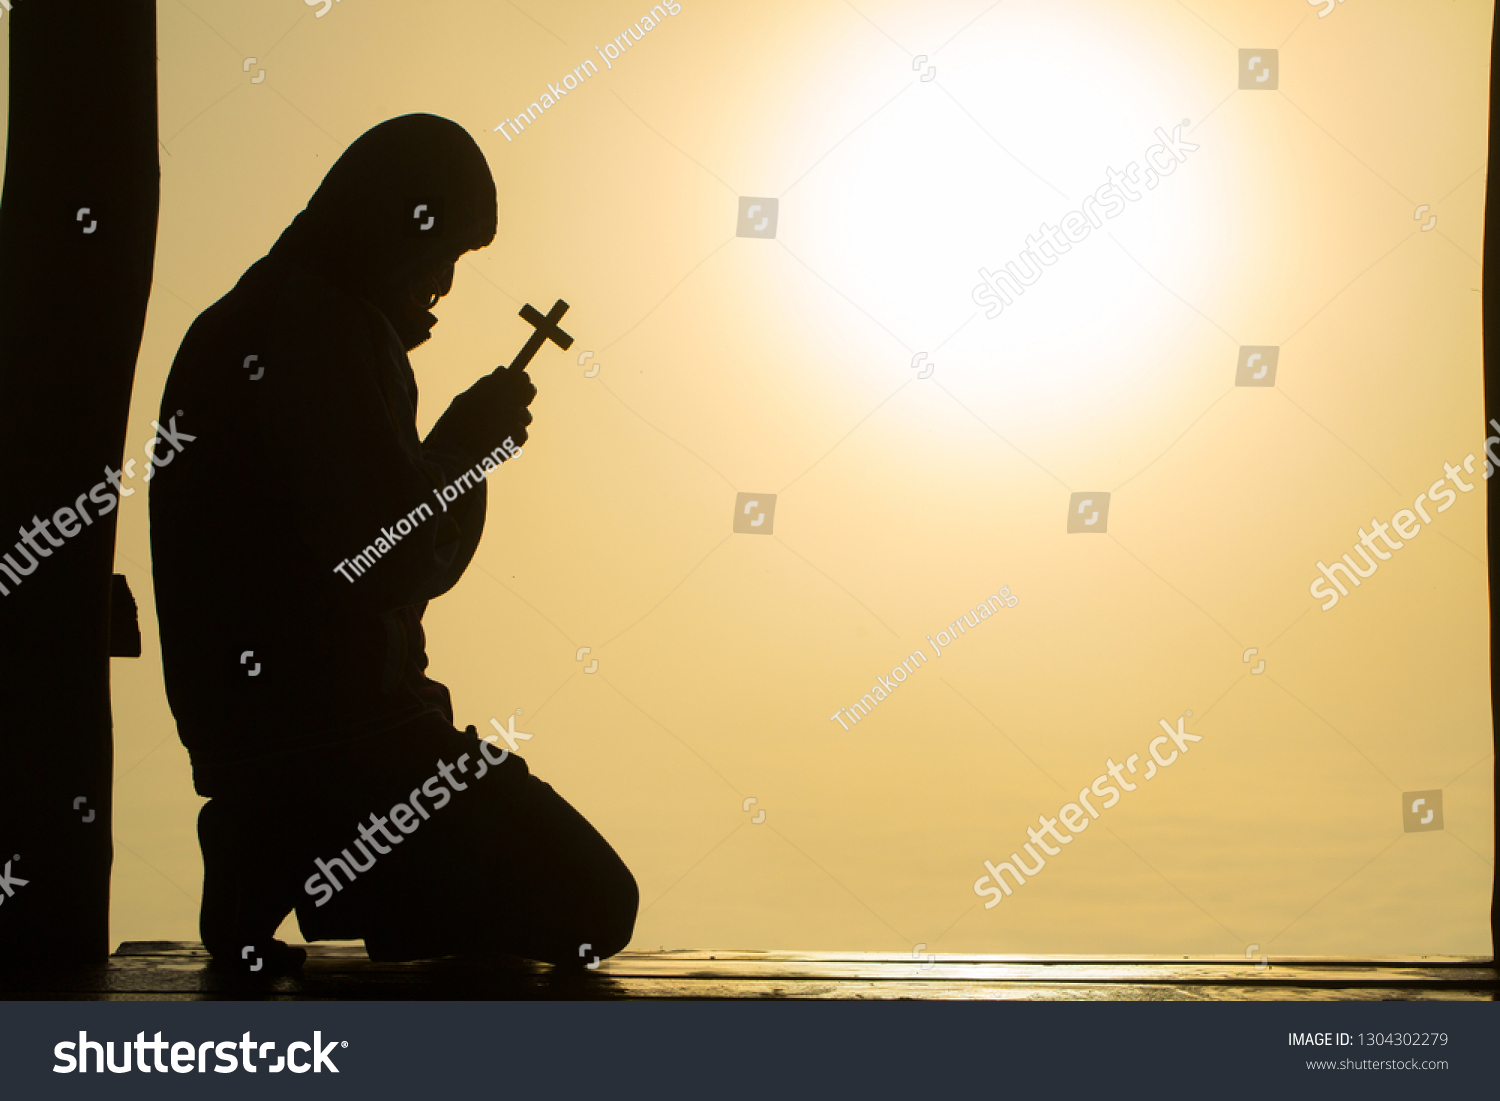 Silhouette of christian Man holding a cross cross in hands praying for blessing from god on sunlight background, hope concept #1304302279